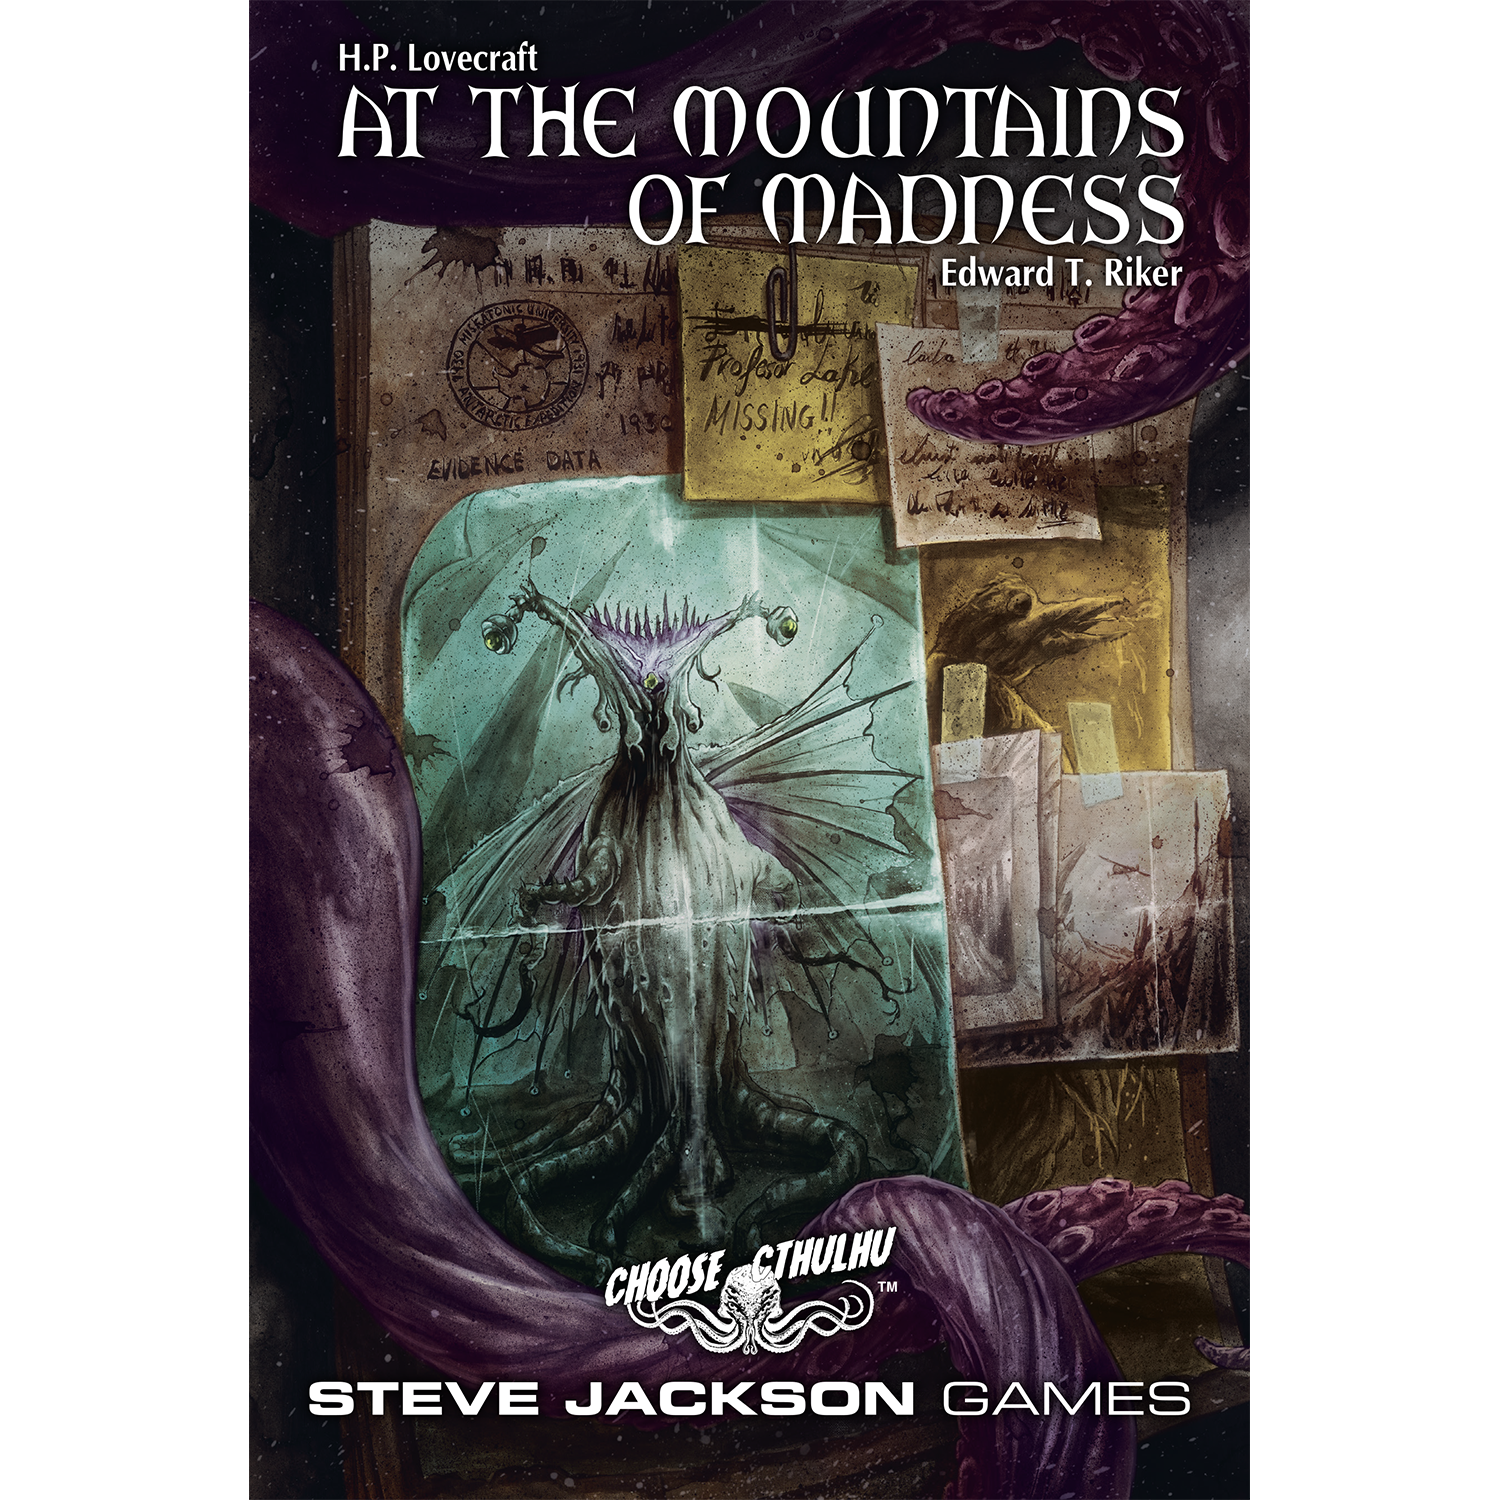 Choose Cthulhu Book 2: At the Mountains of Madness